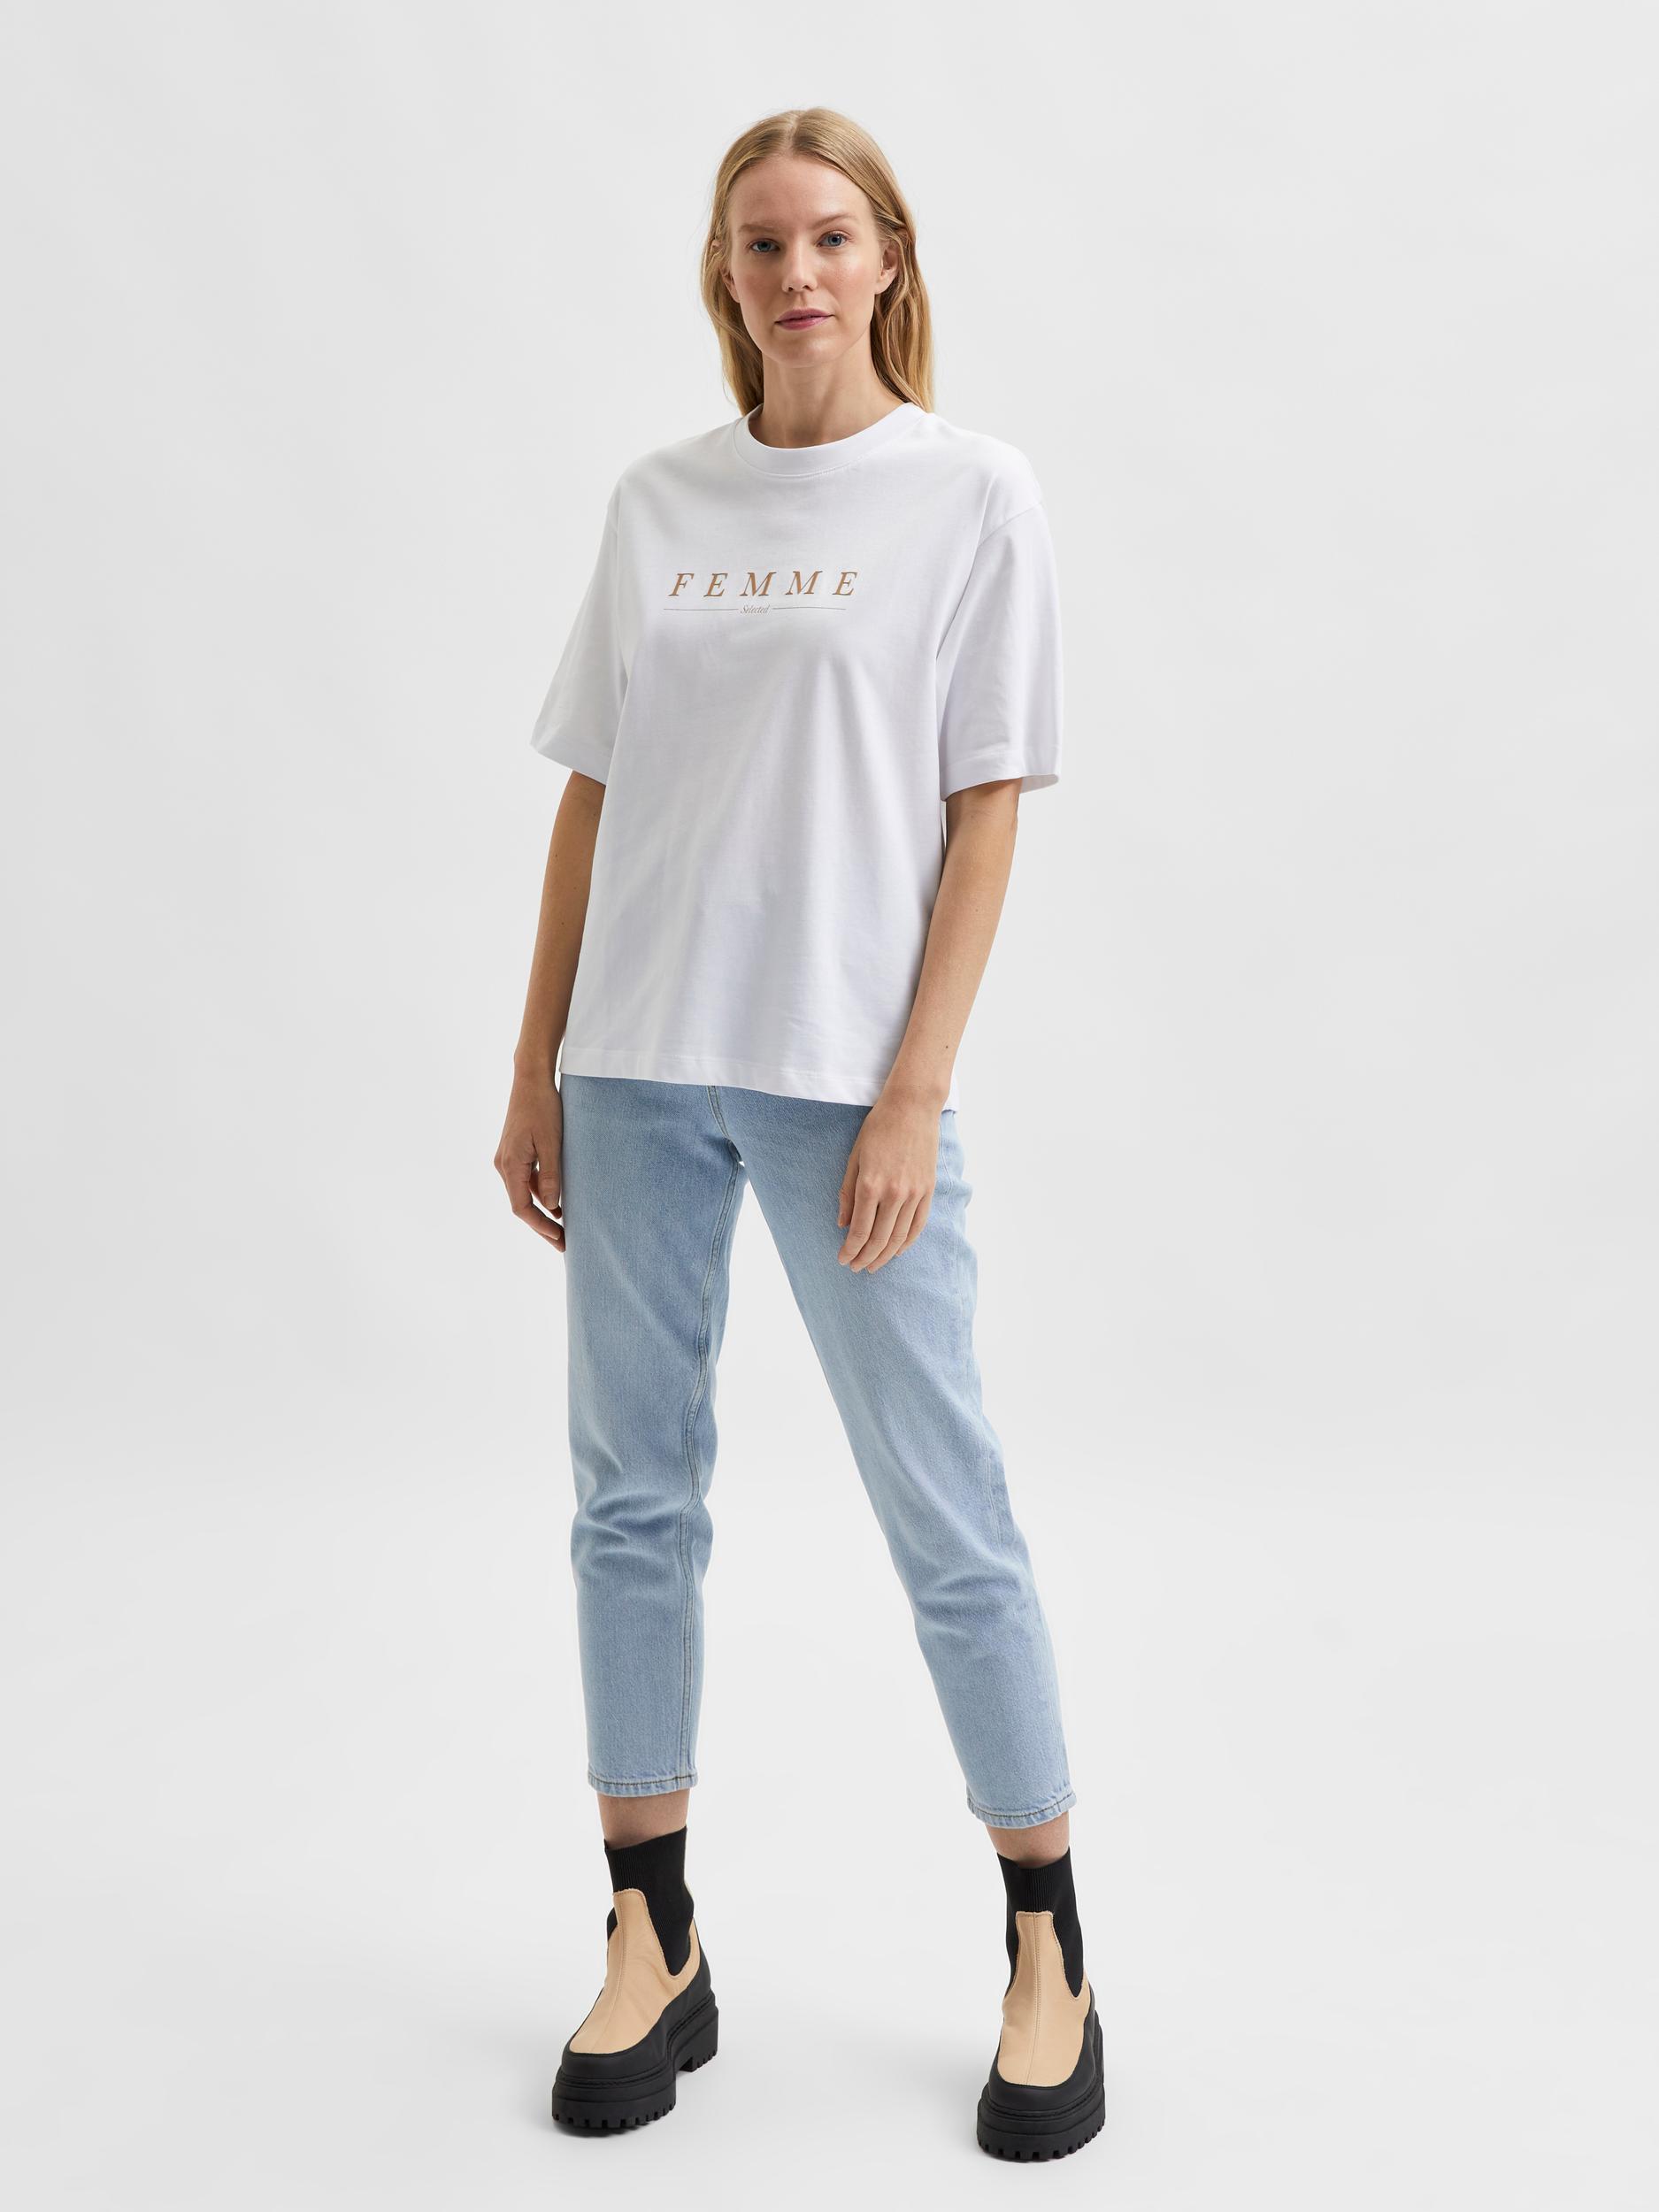 SELECTED FEMME T-Shirt Myla in Weiß 